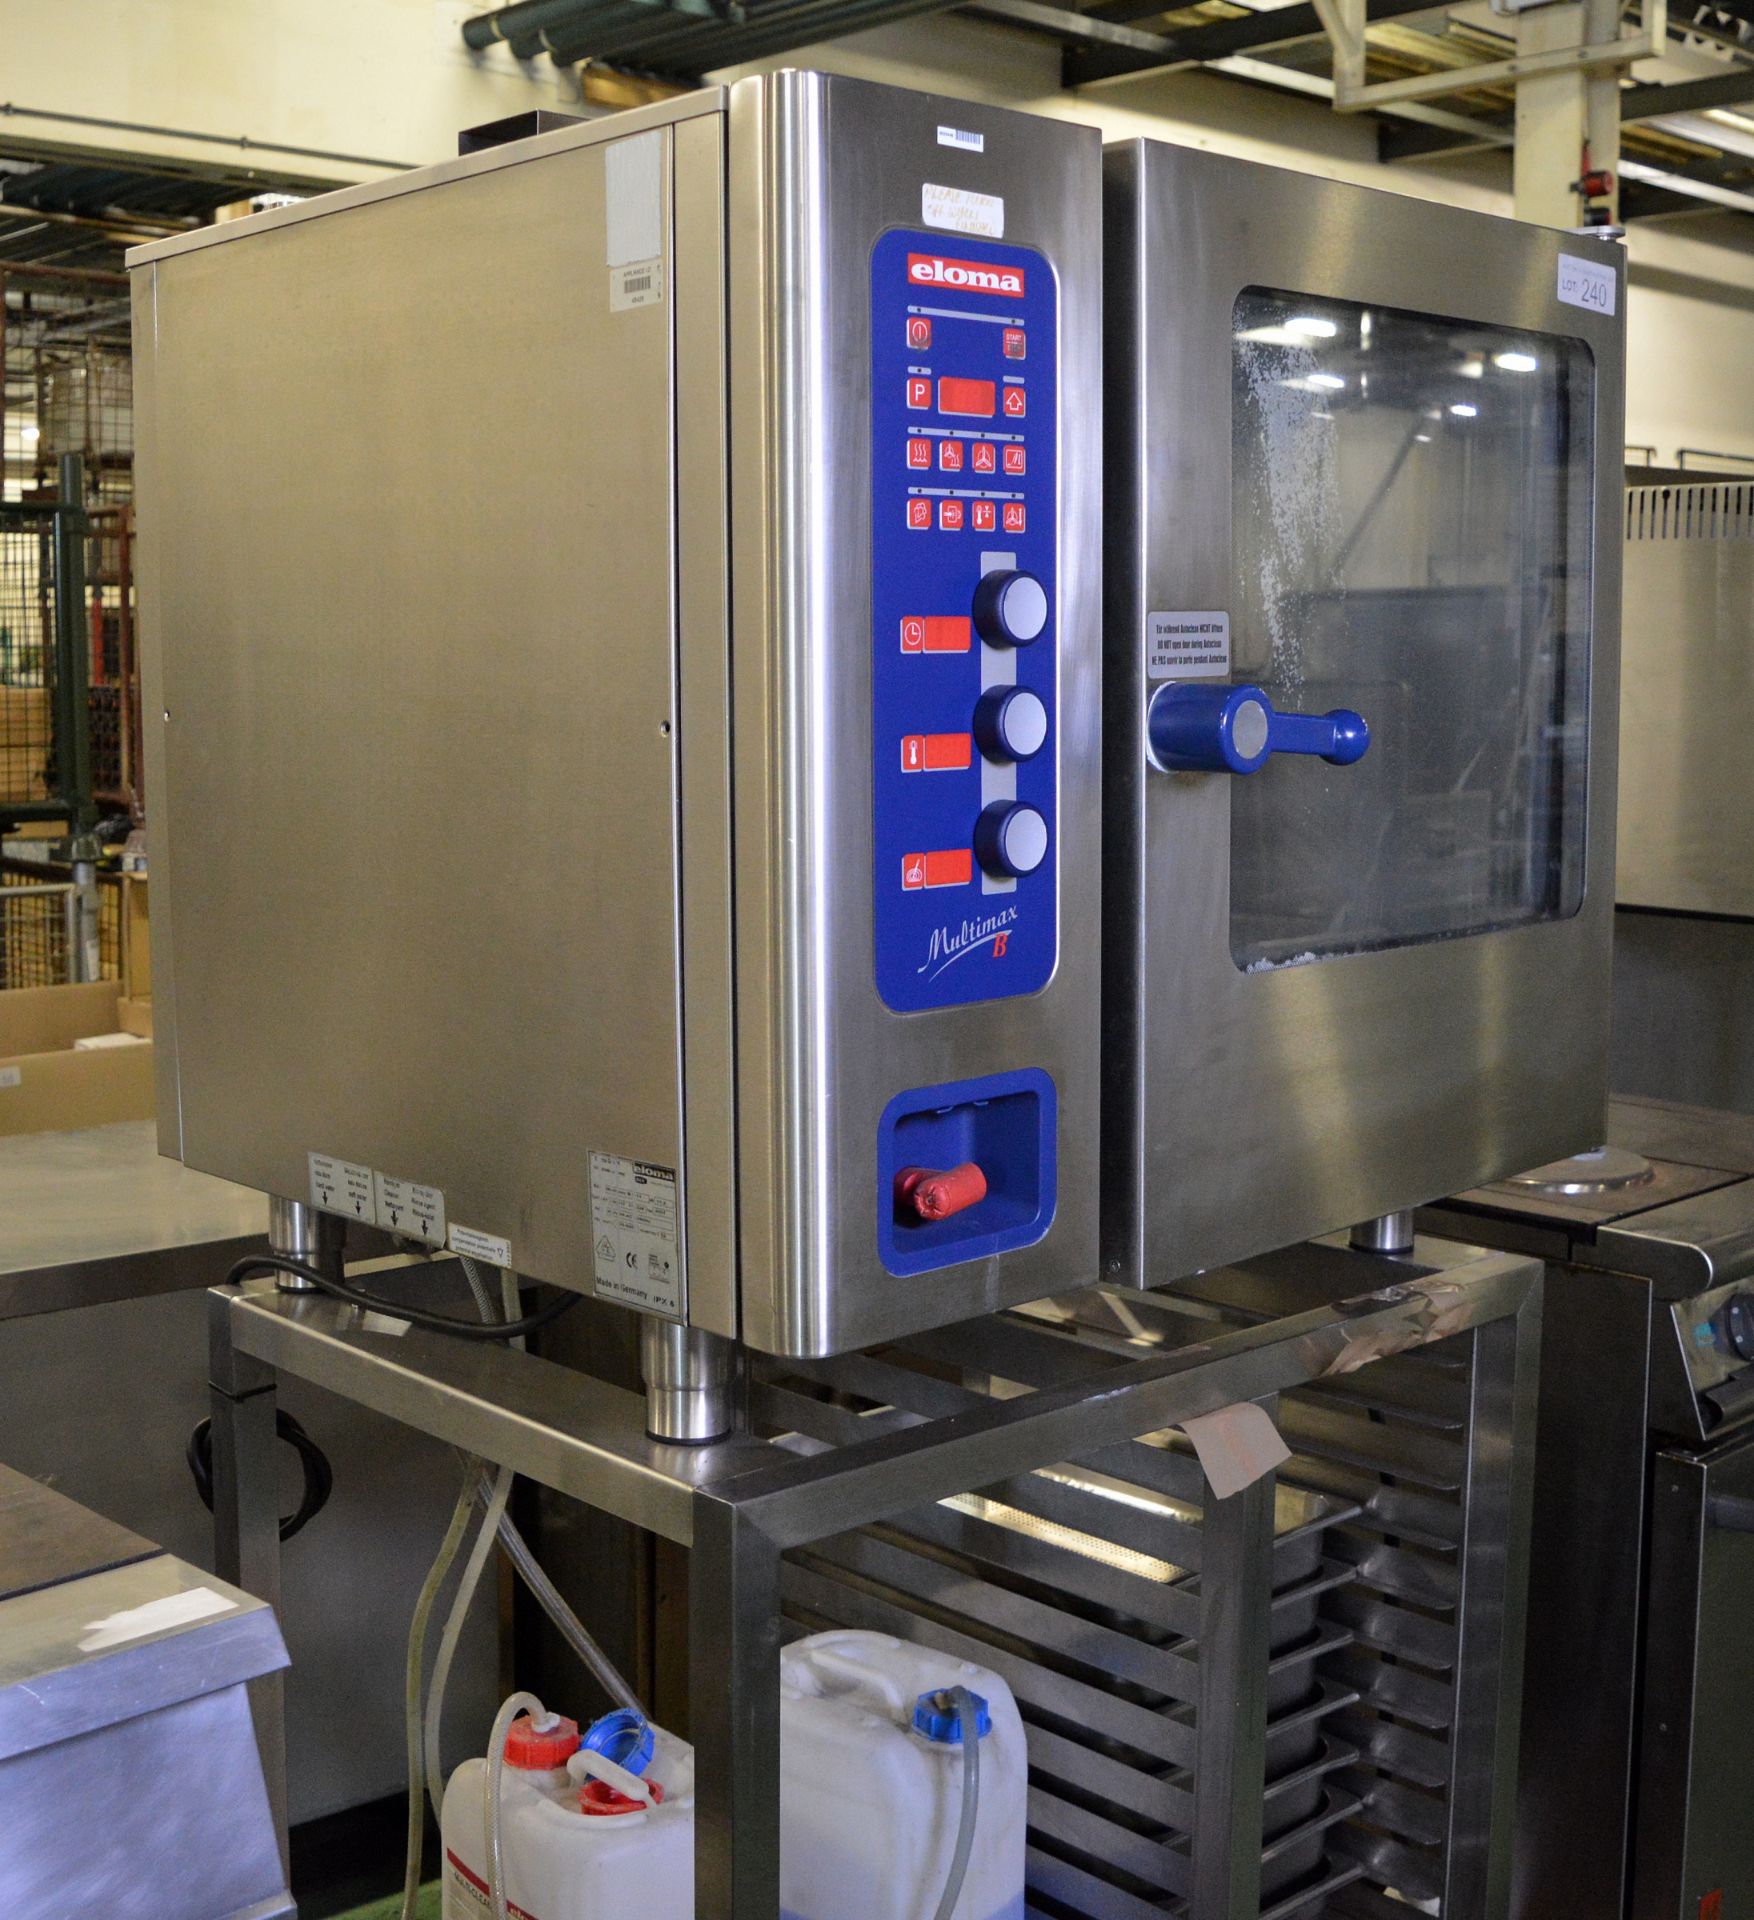 Eloma Multimax B6-11 Stainless steel CombiOven with stand L 930mm x W 850mm x H 1700mm - Image 7 of 11